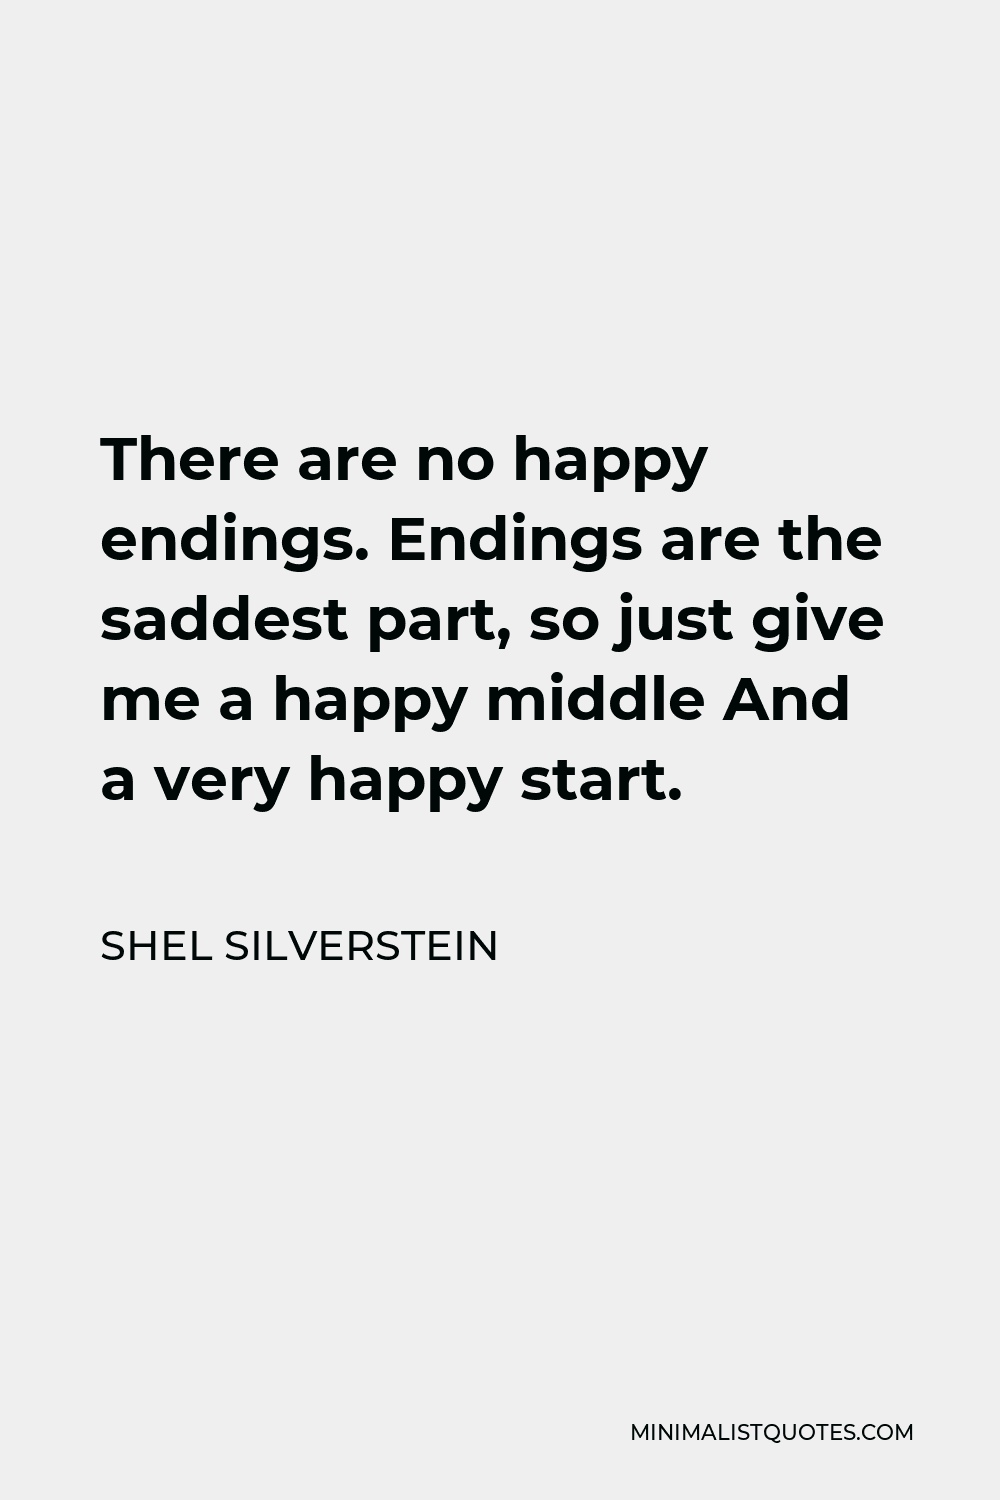 Shel Silverstein Quote - There are no happy endings. Endings are the saddest part, so just give me a happy middle And a very happy start.